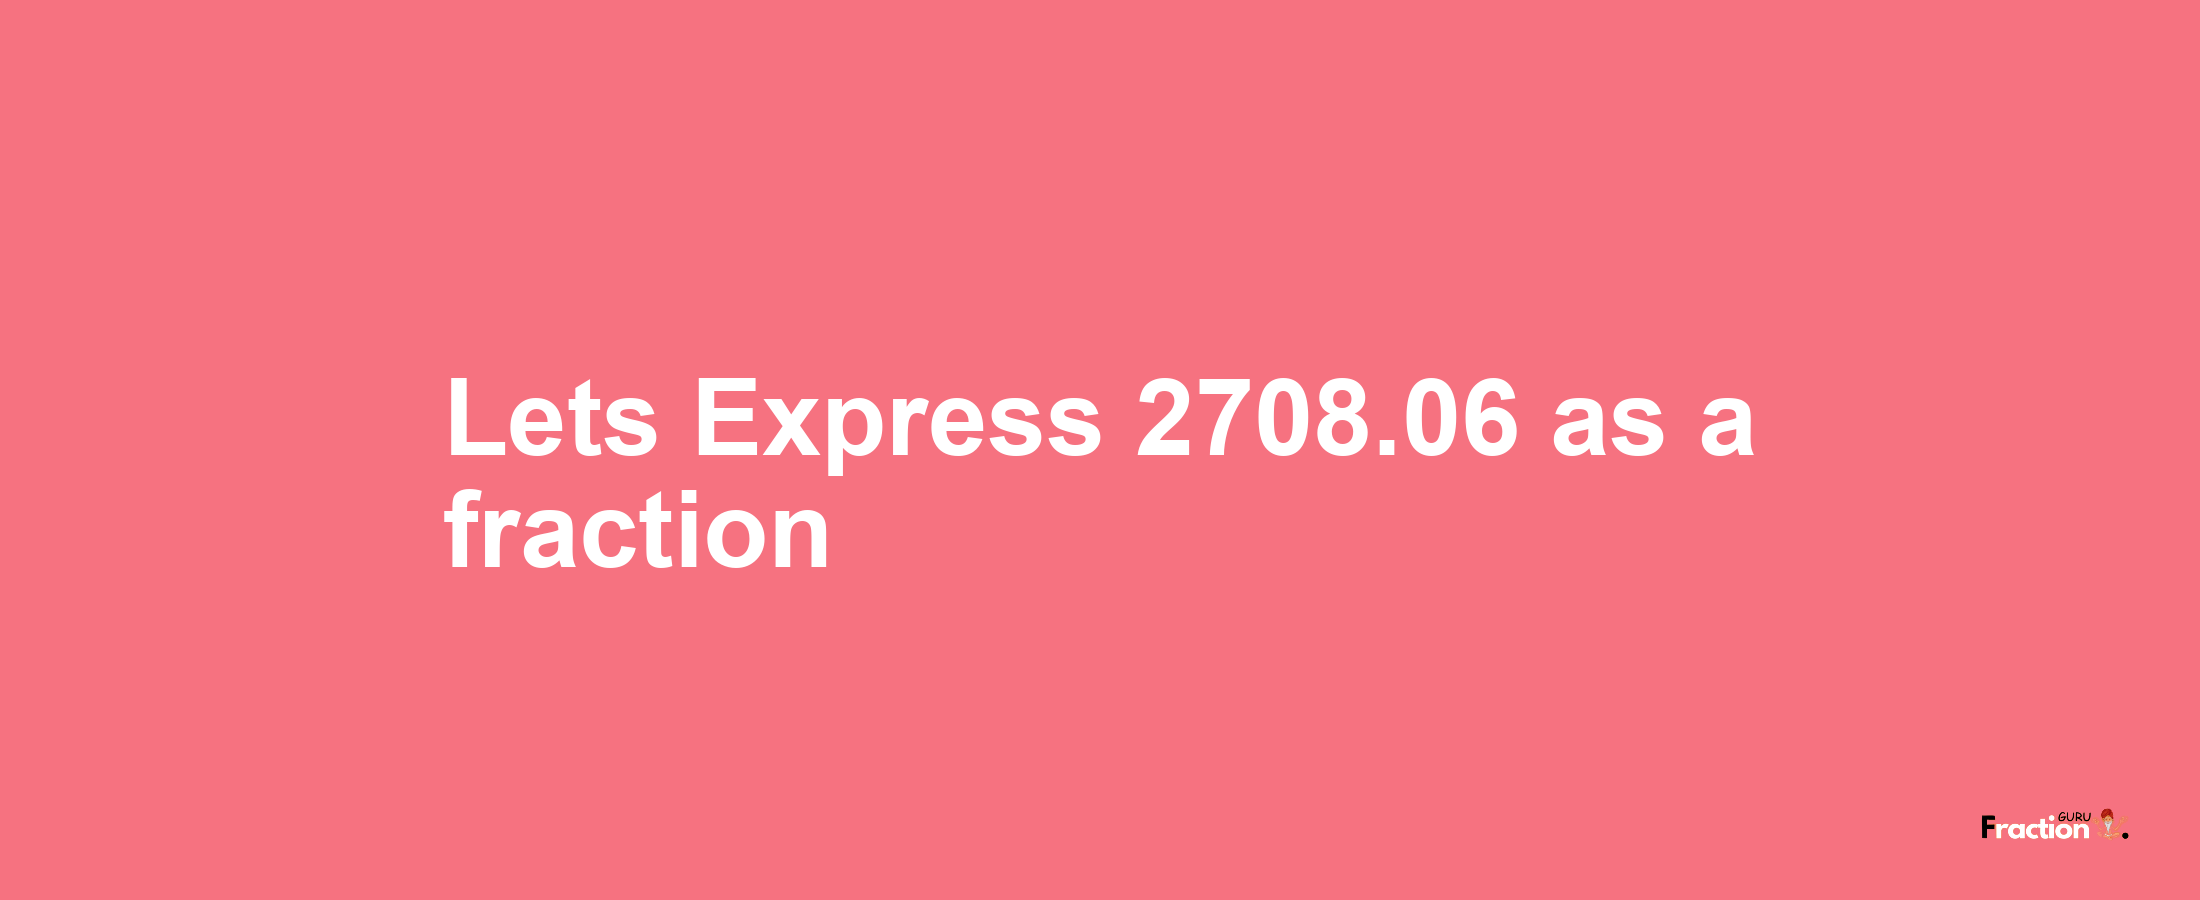 Lets Express 2708.06 as afraction